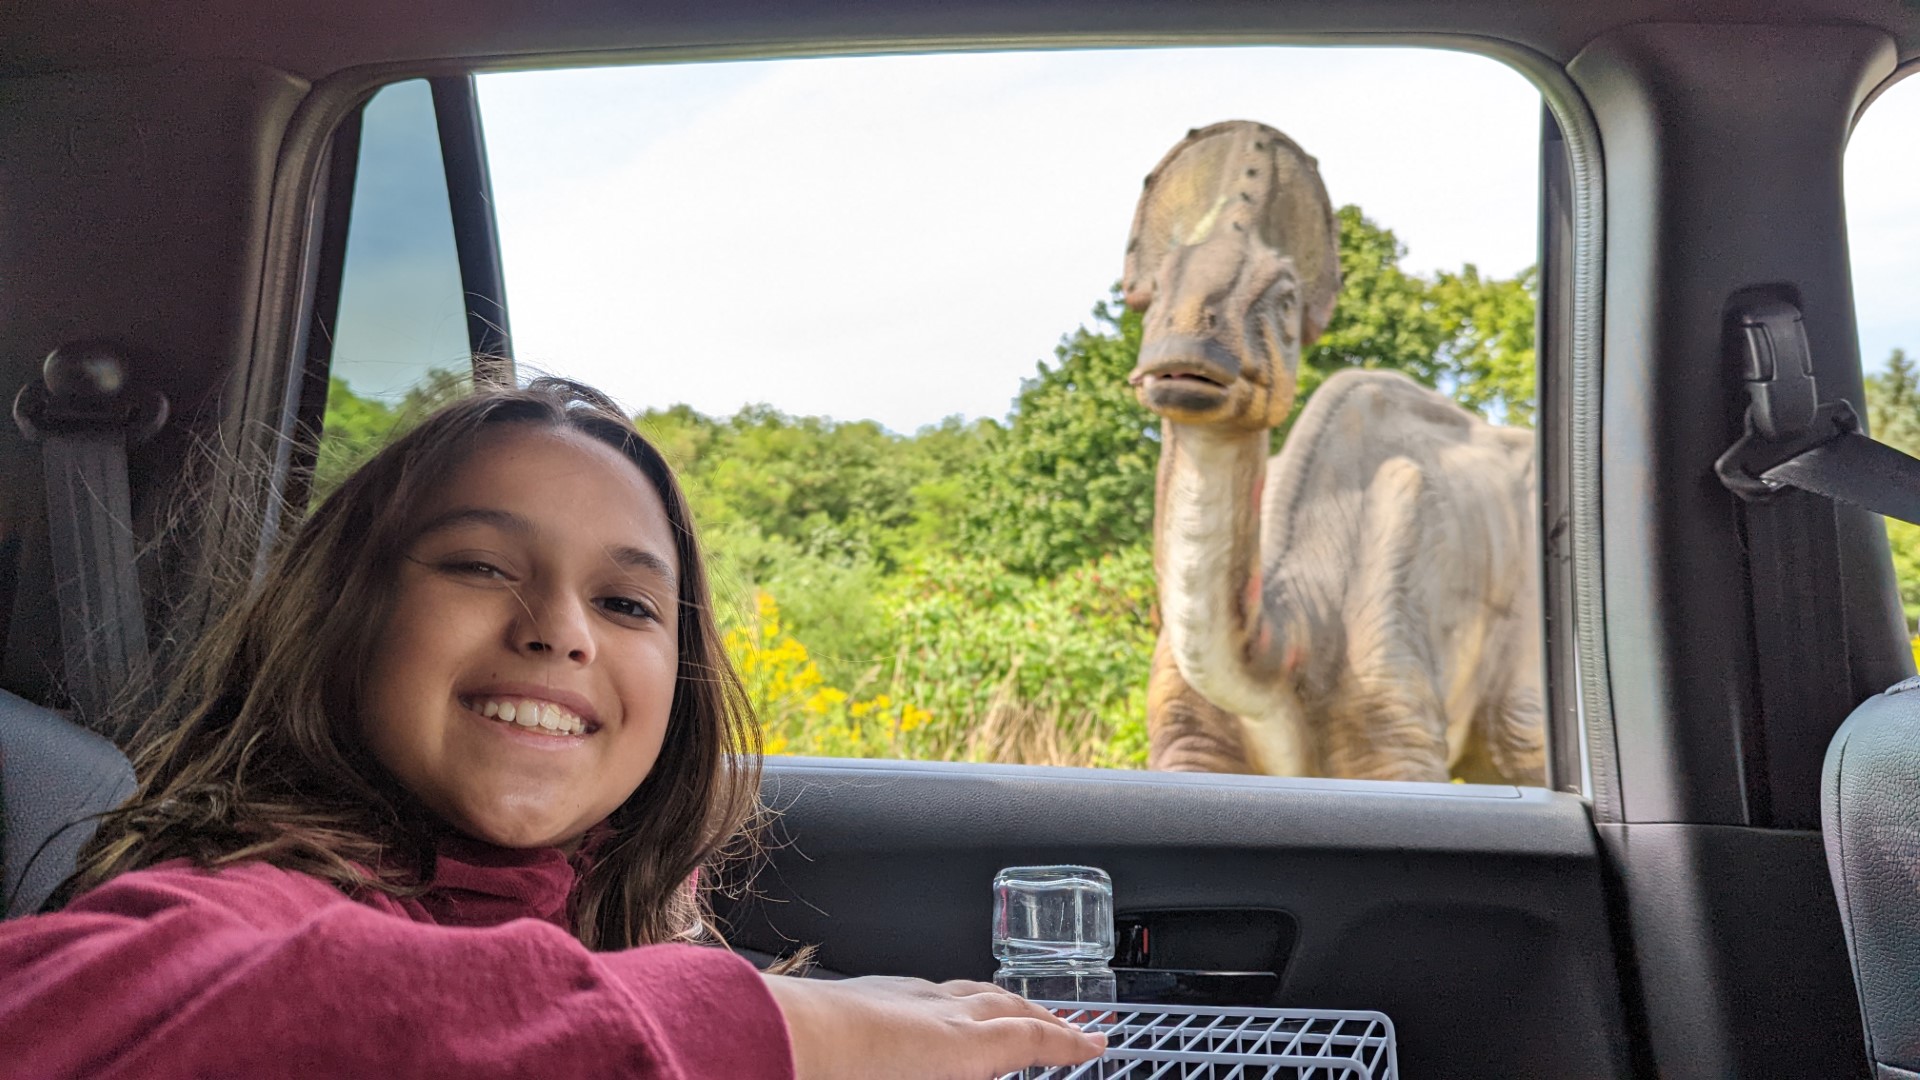 girl in car with dinosaur looking in